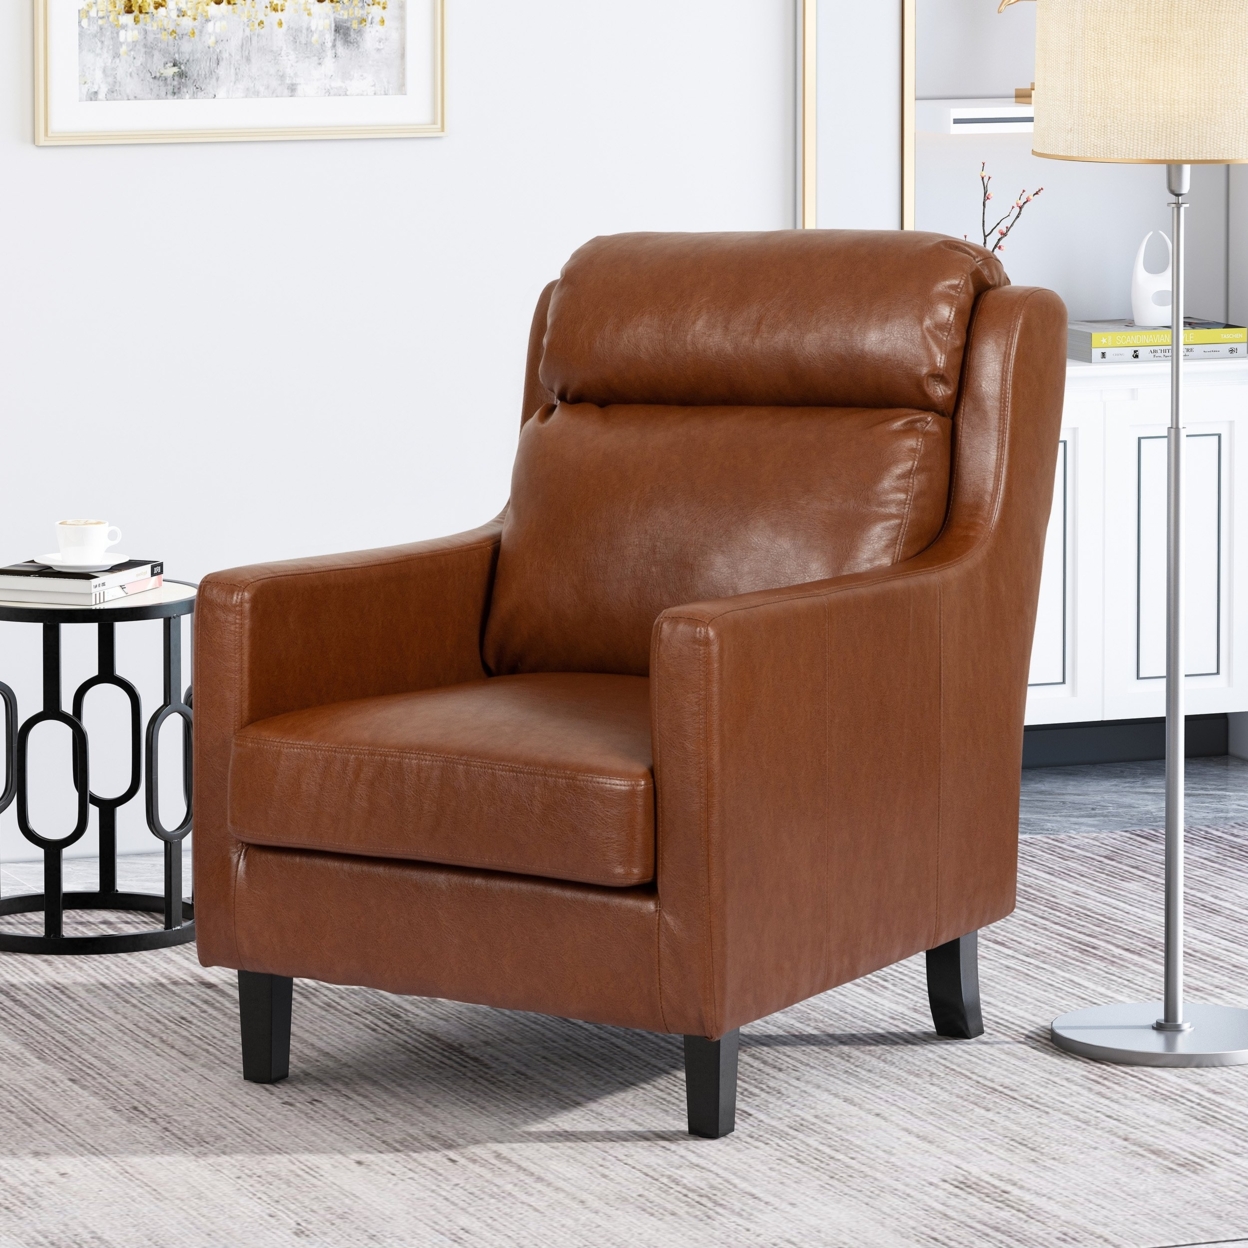 Baden Contemporary Pillow Tufted Faux Leather Club Chair - Dark Brown